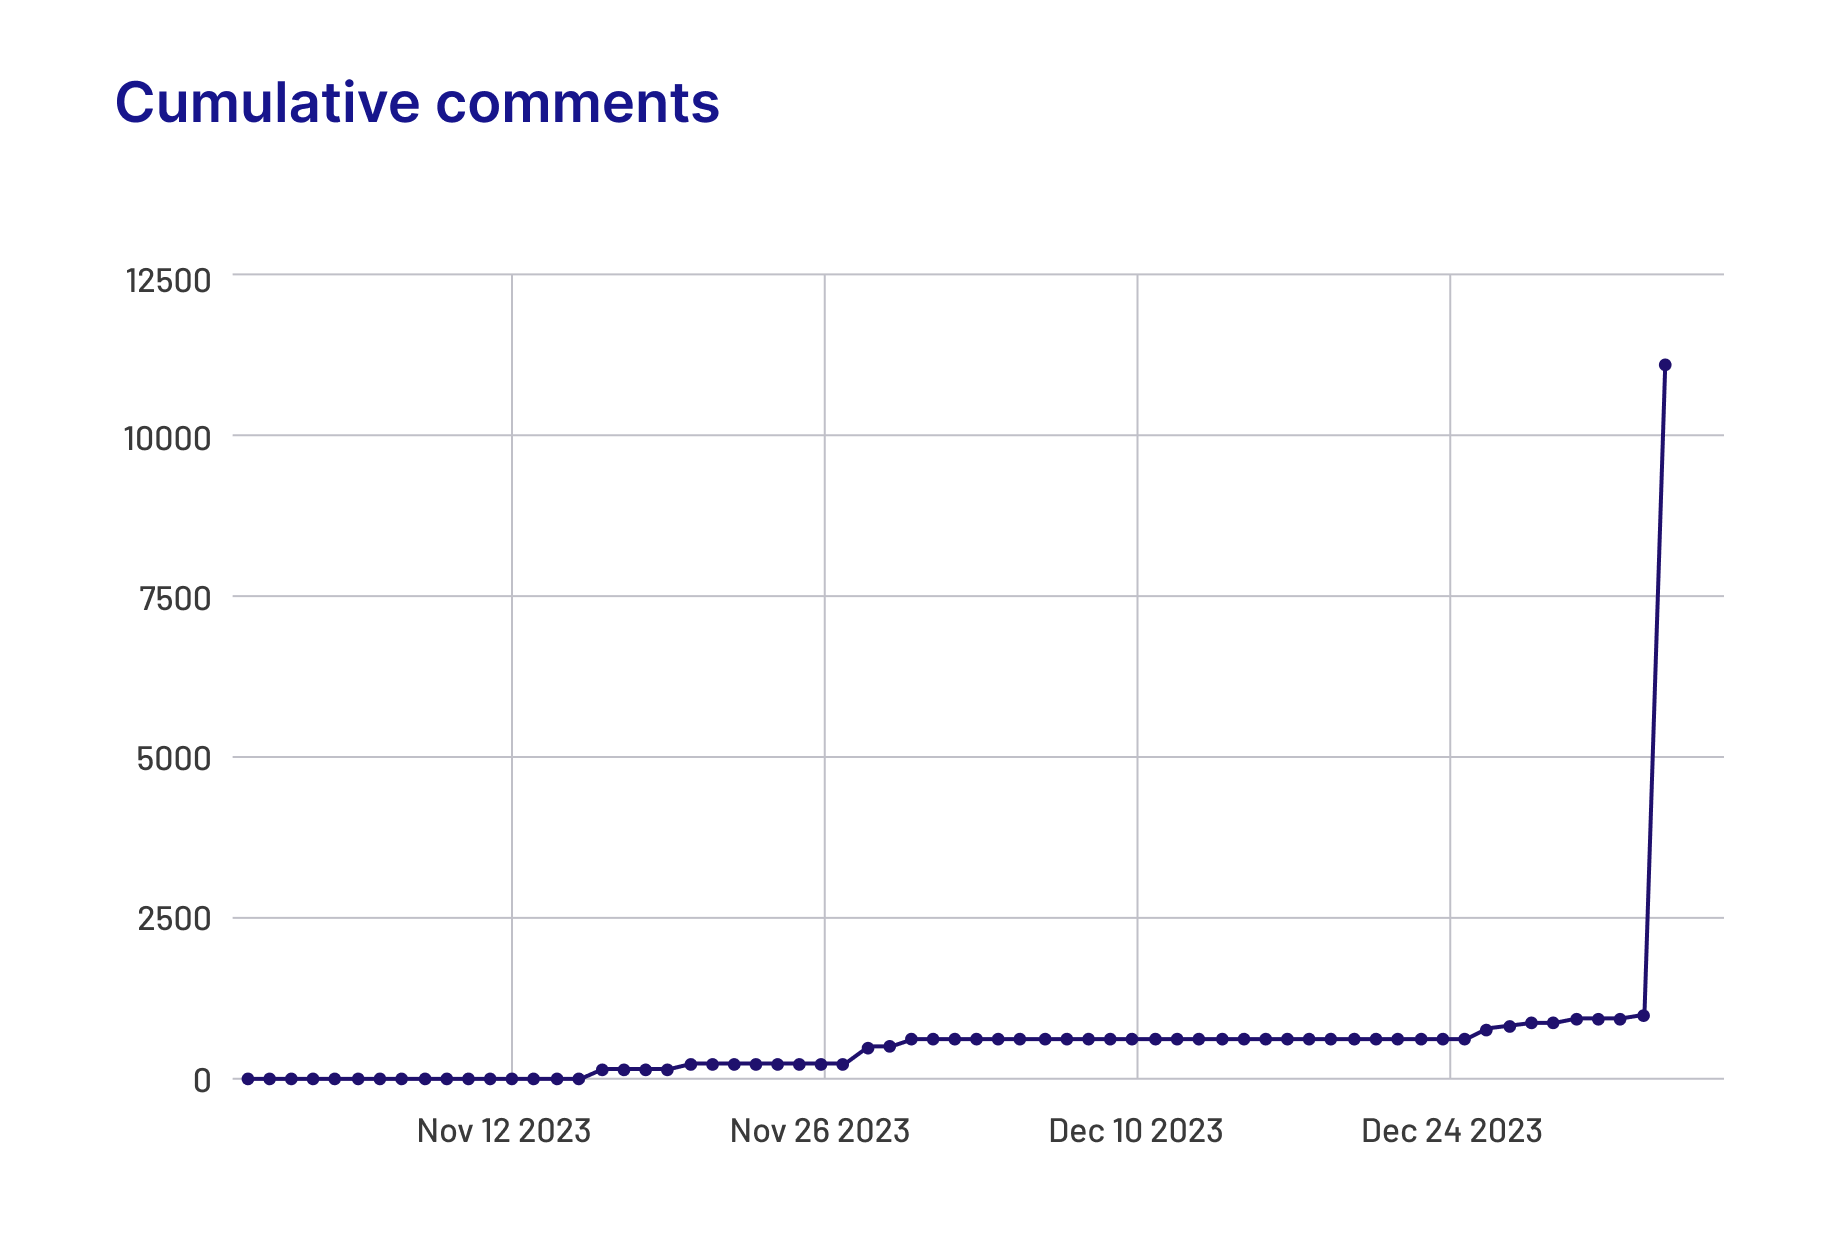 Volume of comments in response to CFPB's proposed Section 1033 rule